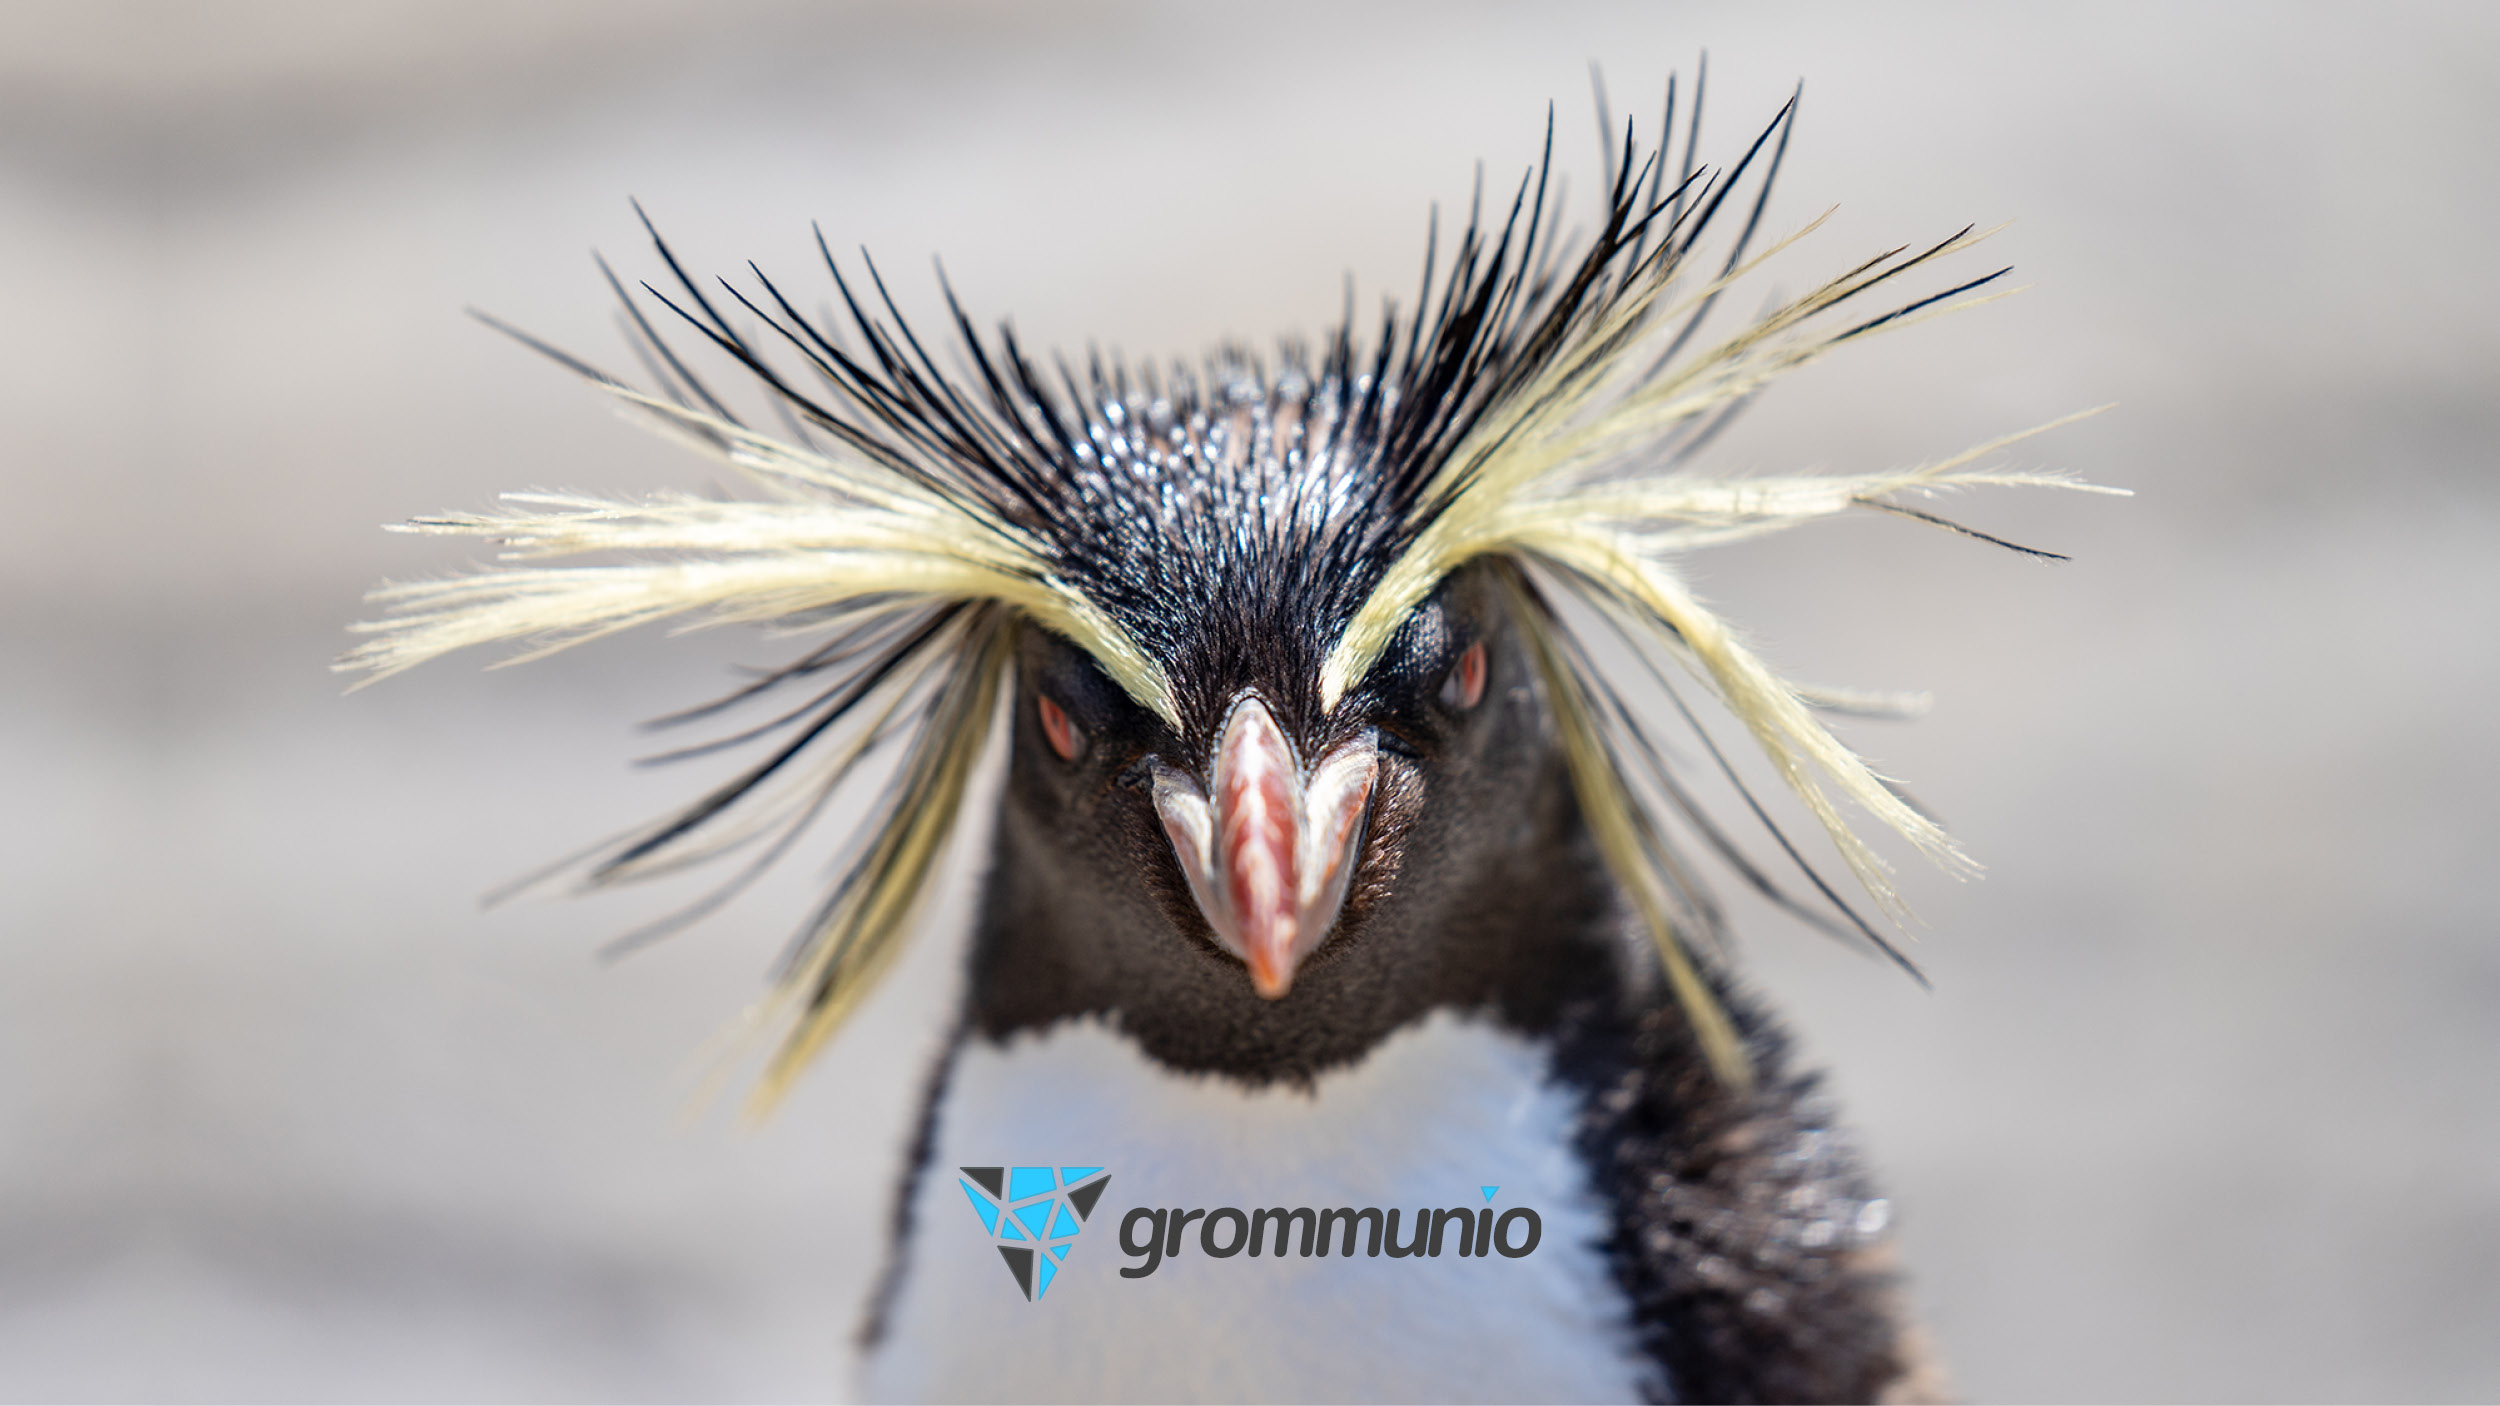 Upgrade to Linux: grommunio is one of the early supporters